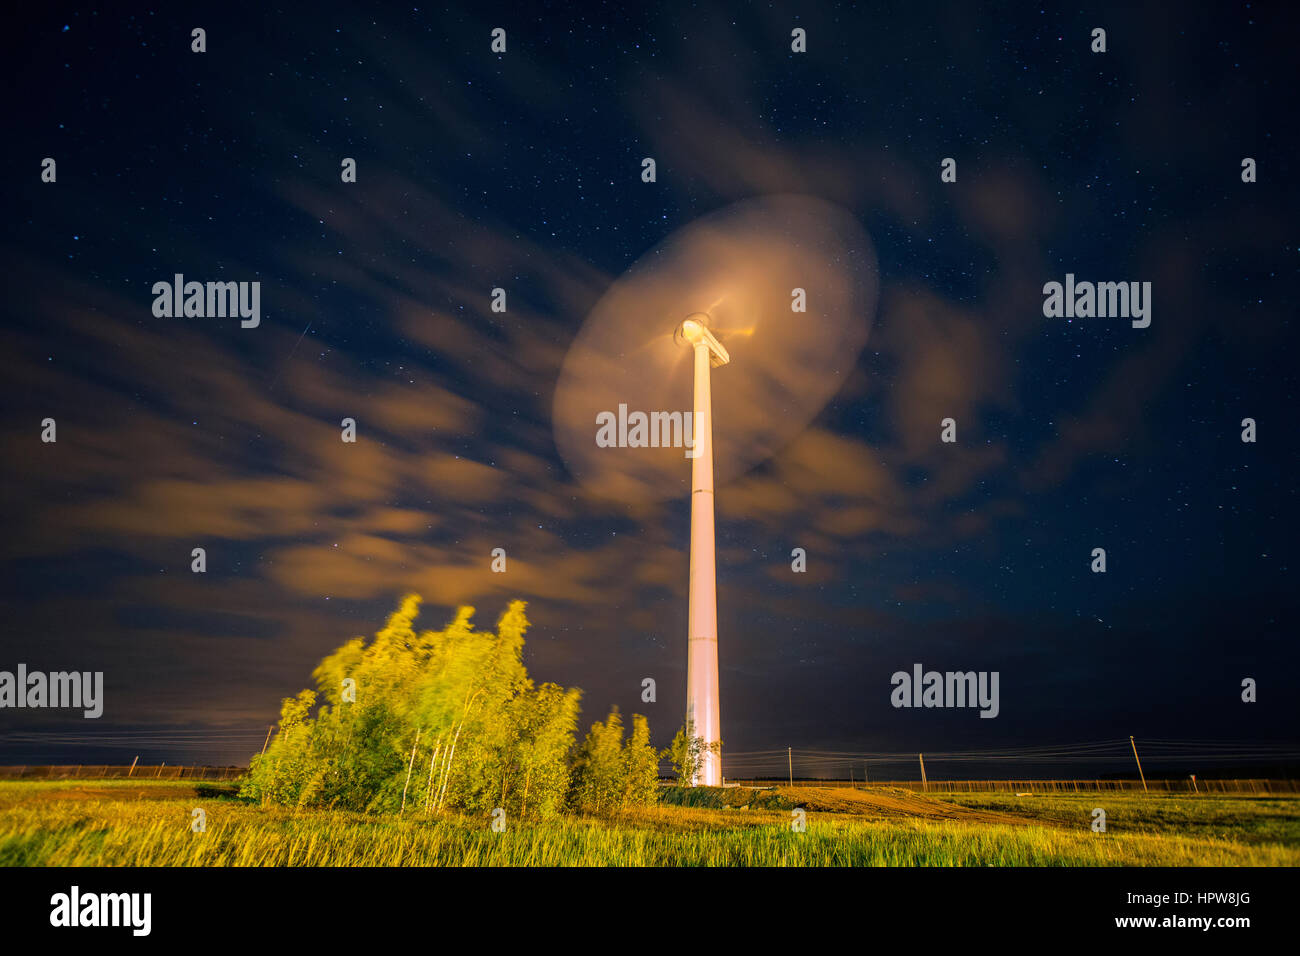 Wind power plant under the sky with stars Stock Photo